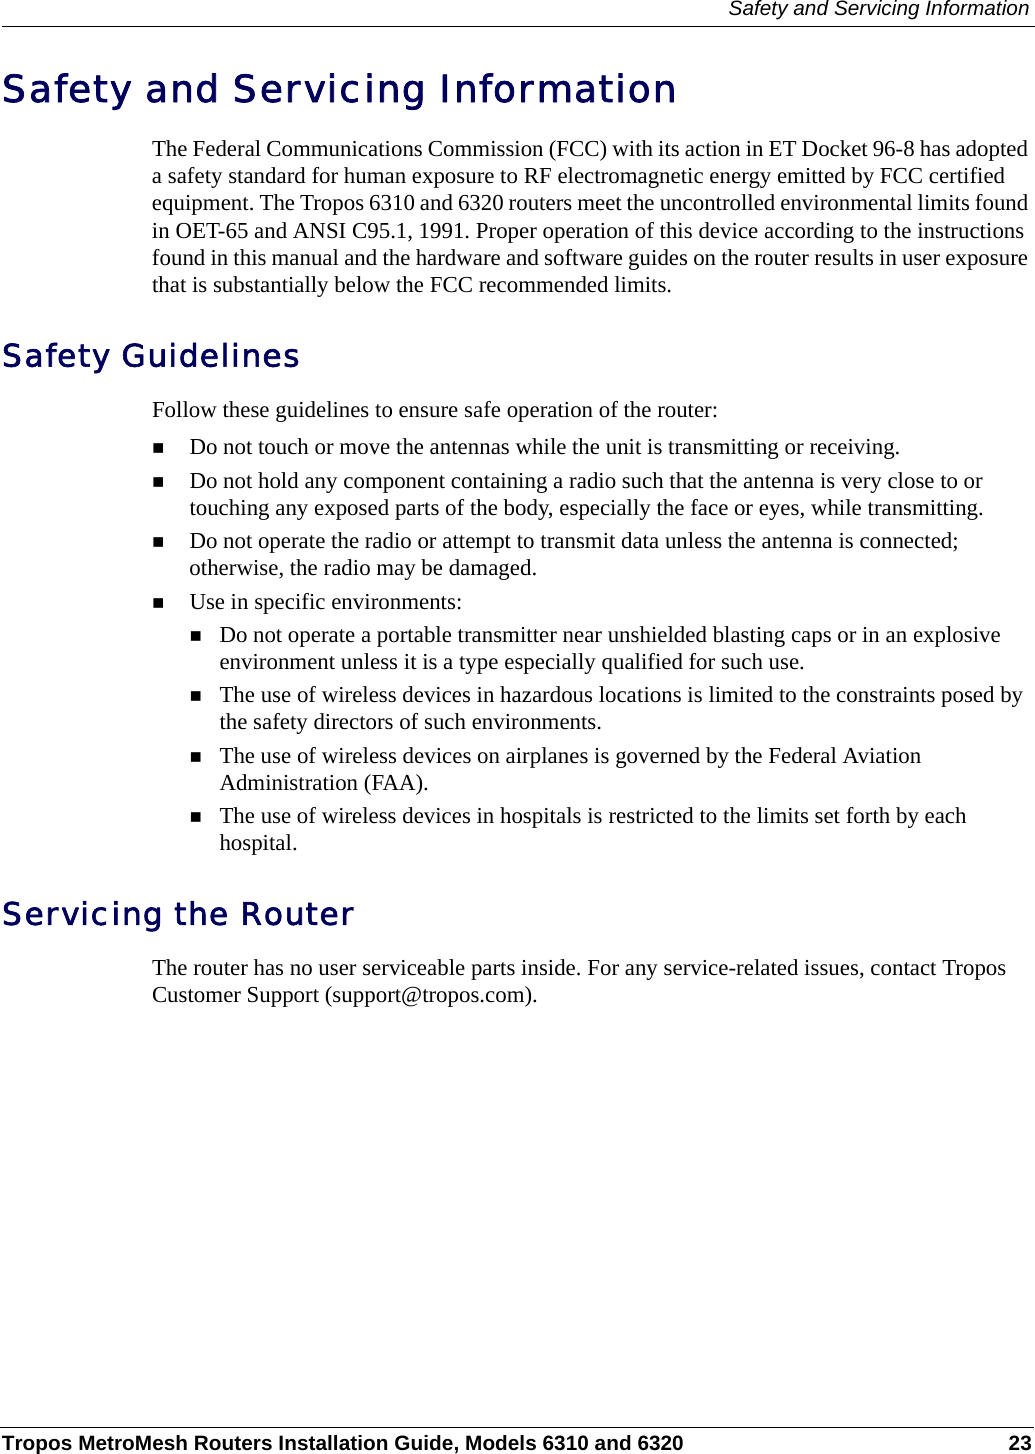 Safety and Servicing InformationTropos MetroMesh Routers Installation Guide, Models 6310 and 6320 23Safety and Servicing Information The Federal Communications Commission (FCC) with its action in ET Docket 96-8 has adopted a safety standard for human exposure to RF electromagnetic energy emitted by FCC certified equipment. The Tropos 6310 and 6320 routers meet the uncontrolled environmental limits found in OET-65 and ANSI C95.1, 1991. Proper operation of this device according to the instructions found in this manual and the hardware and software guides on the router results in user exposure that is substantially below the FCC recommended limits.Safety GuidelinesFollow these guidelines to ensure safe operation of the router:Do not touch or move the antennas while the unit is transmitting or receiving.Do not hold any component containing a radio such that the antenna is very close to or touching any exposed parts of the body, especially the face or eyes, while transmitting. Do not operate the radio or attempt to transmit data unless the antenna is connected; otherwise, the radio may be damaged.Use in specific environments:Do not operate a portable transmitter near unshielded blasting caps or in an explosive environment unless it is a type especially qualified for such use.The use of wireless devices in hazardous locations is limited to the constraints posed by the safety directors of such environments.The use of wireless devices on airplanes is governed by the Federal Aviation Administration (FAA).The use of wireless devices in hospitals is restricted to the limits set forth by each hospital.Servicing the RouterThe router has no user serviceable parts inside. For any service-related issues, contact Tropos Customer Support (support@tropos.com).